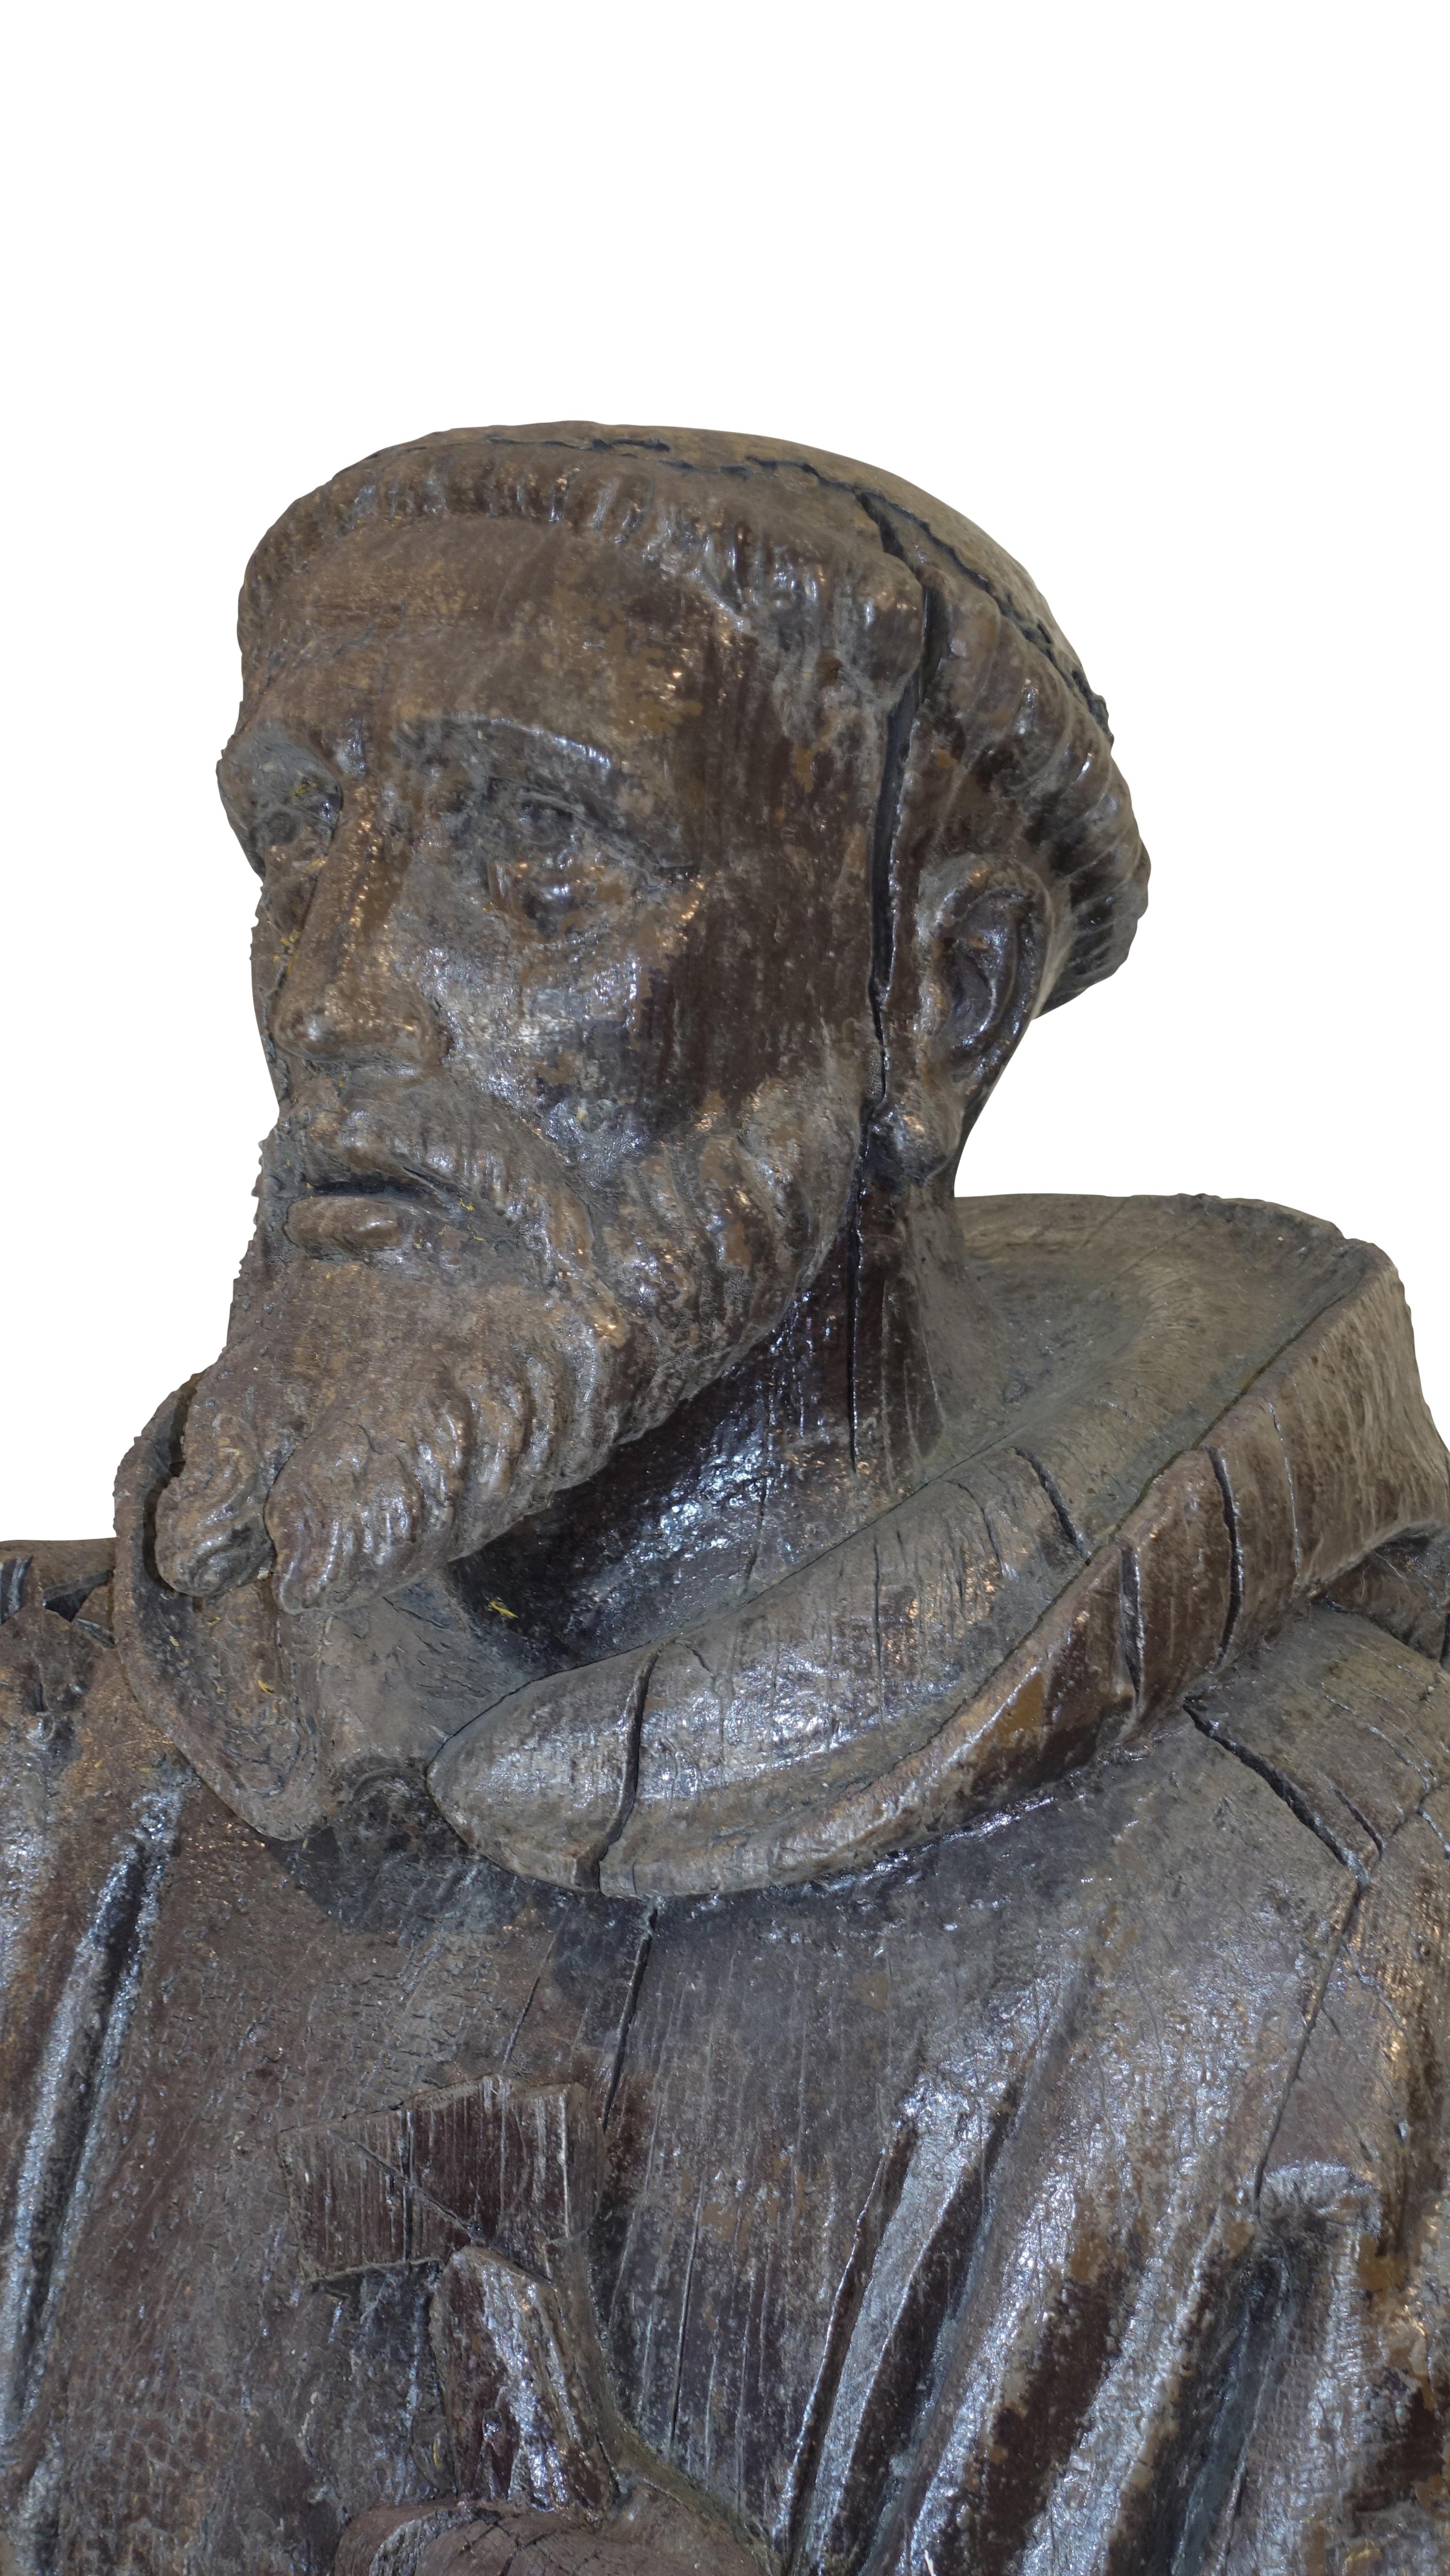 Spanish 18th Century larger than Life-Size Carved and Painted Bust of Saint Francis